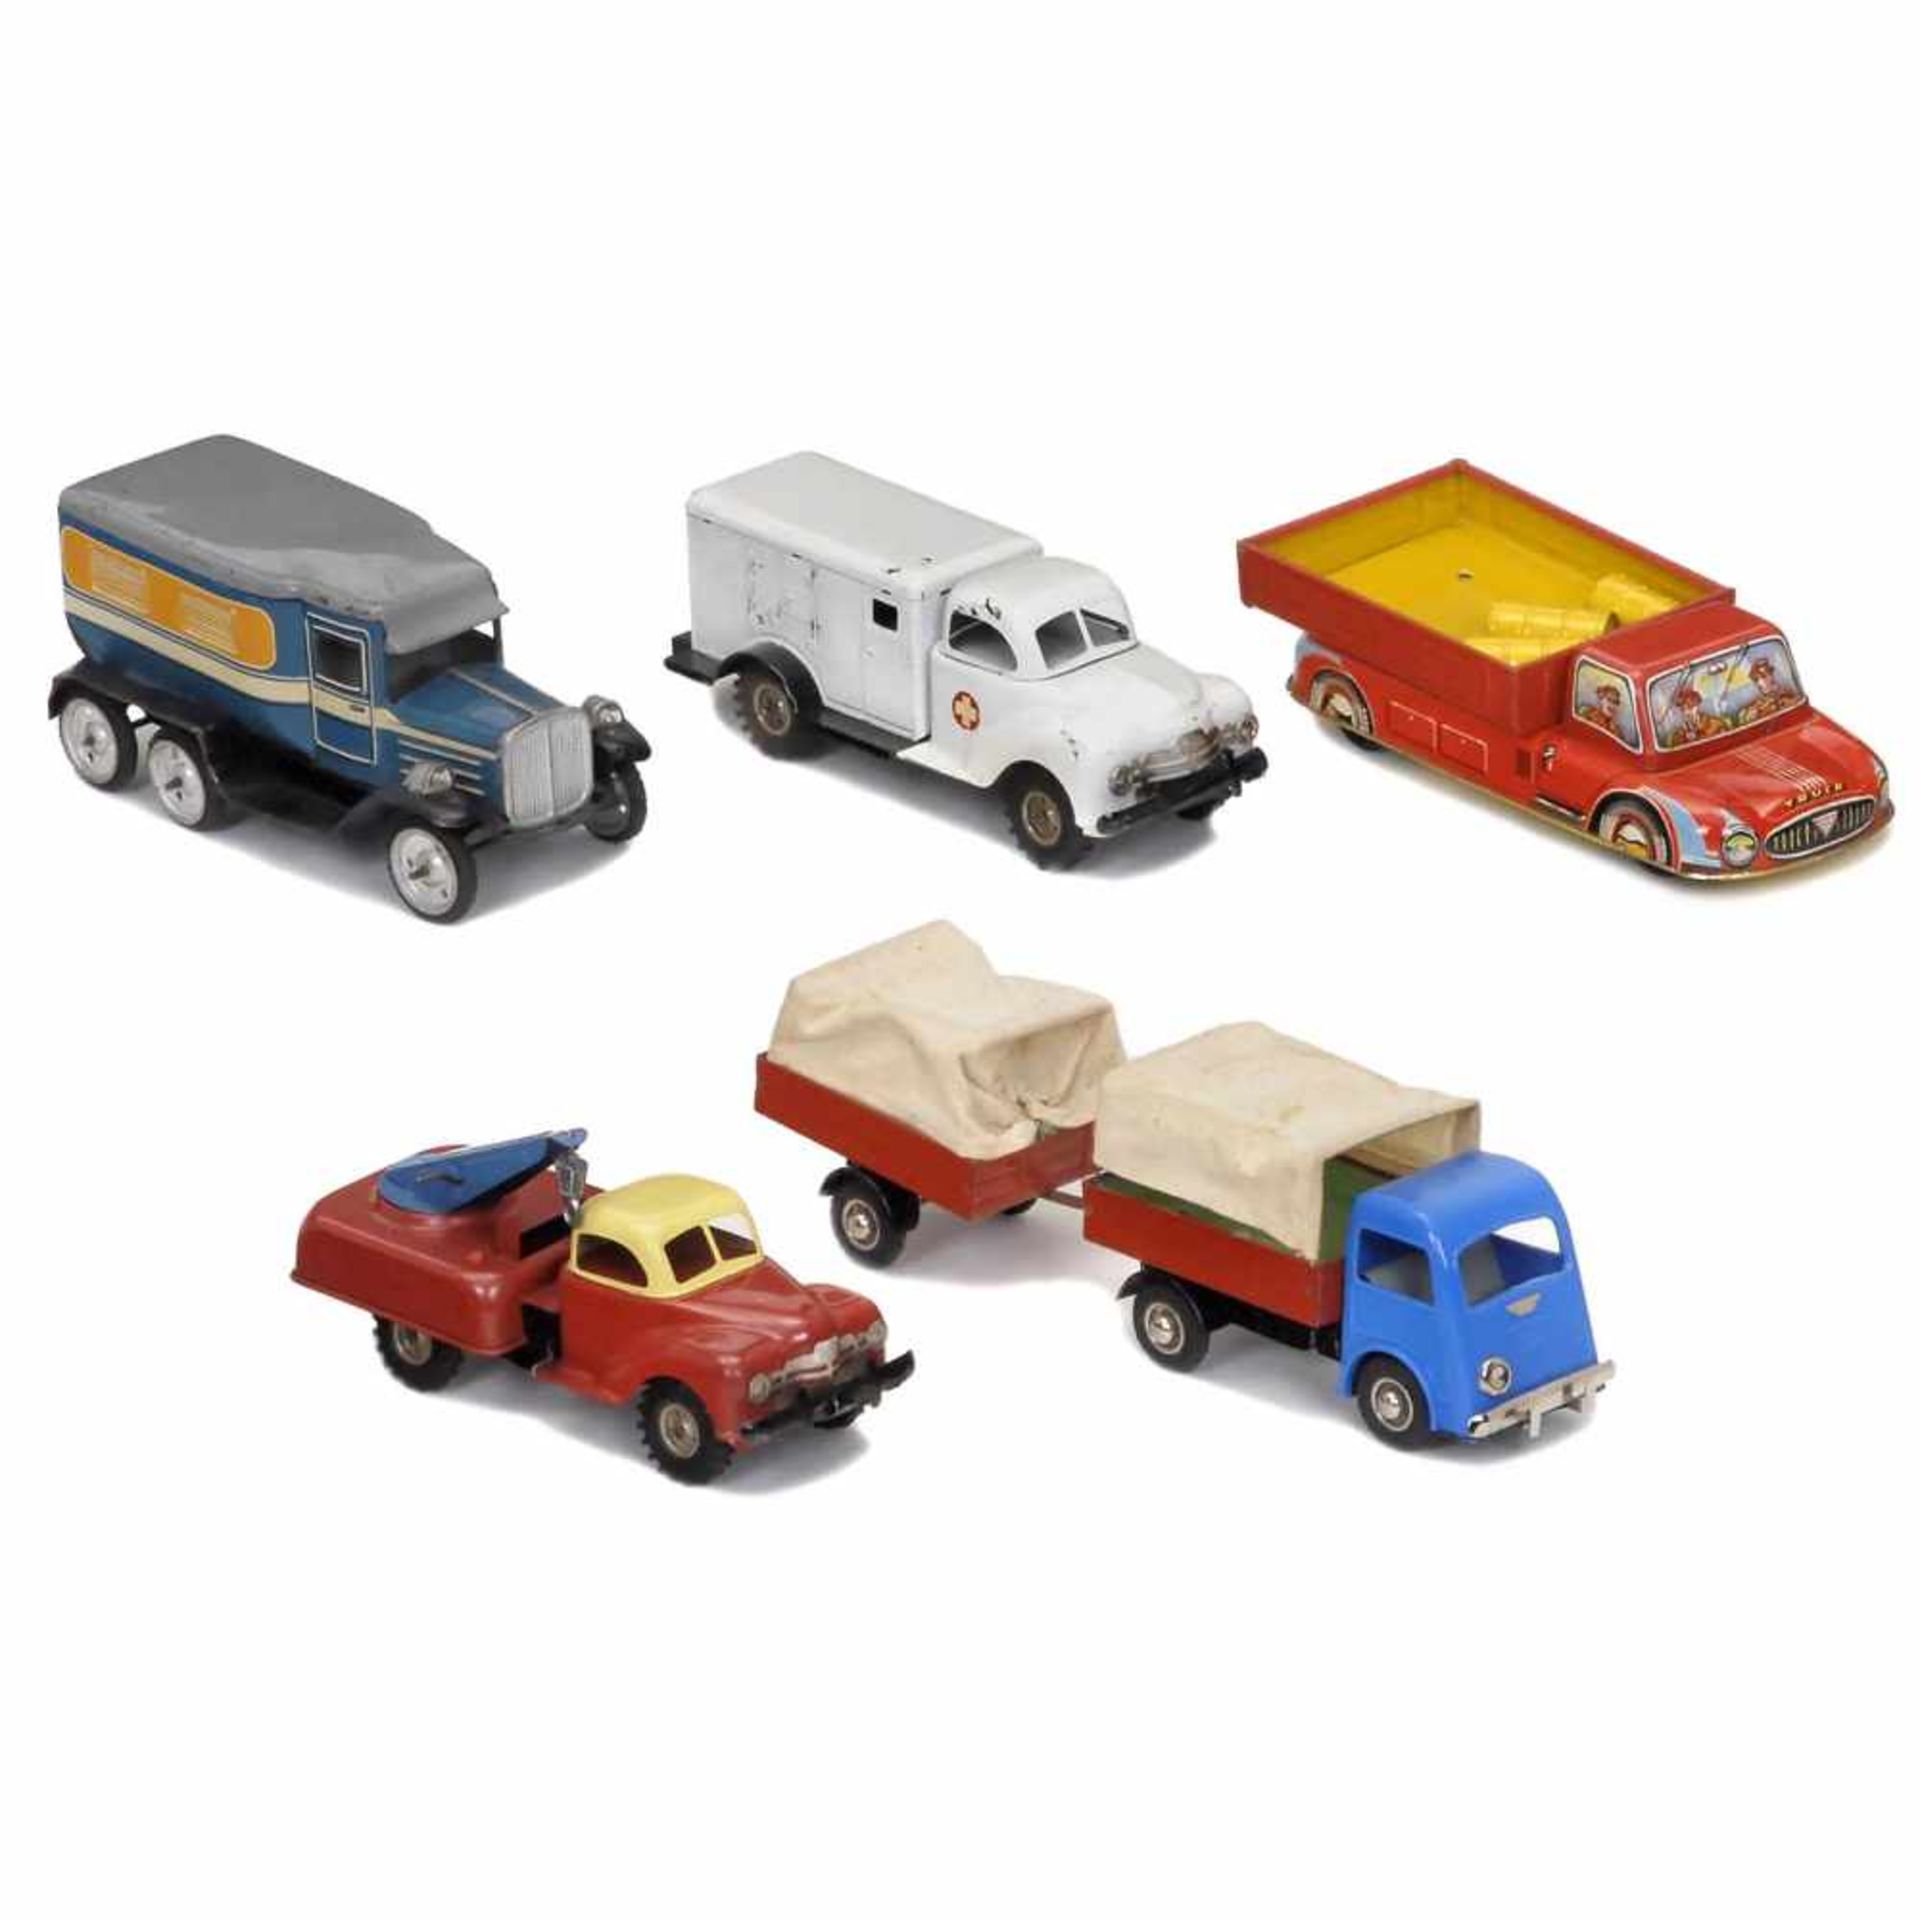 5 Tin-Toy Lorries, c. 1950-601) Gama, ambulance, U.S.-Zone Germany. Lacquered tin, friction drive (